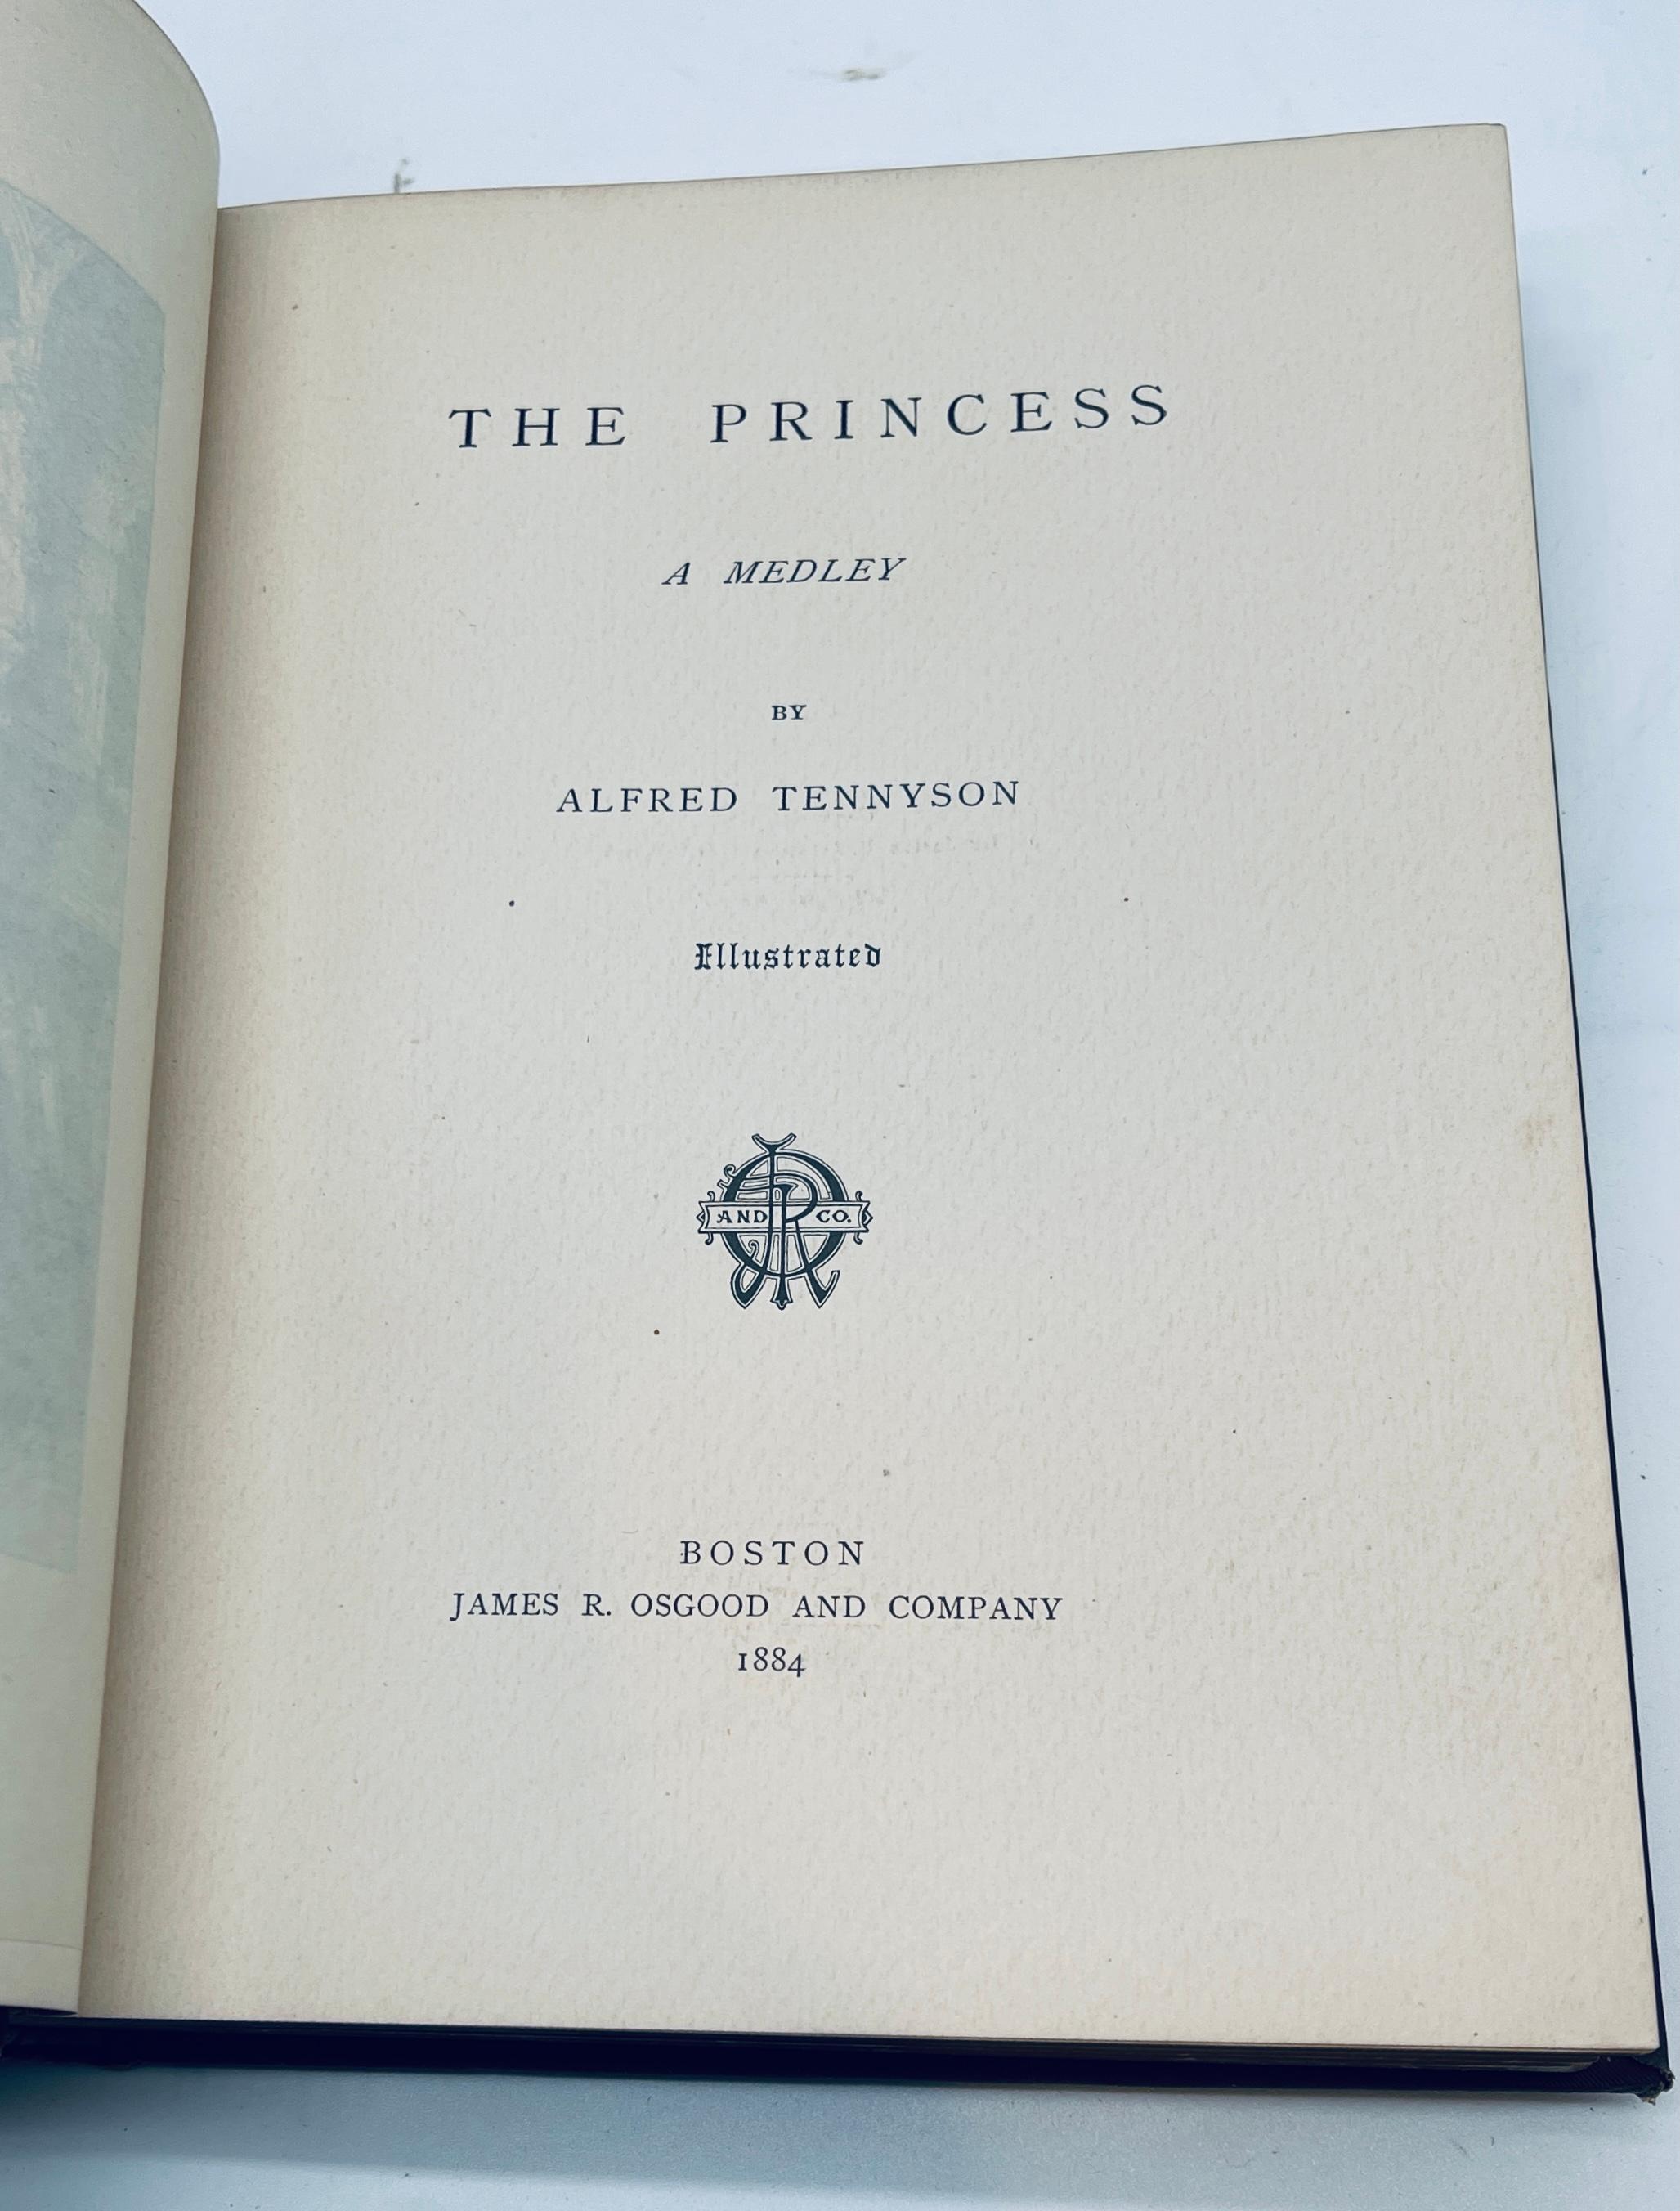 The Princess by Alfred Tennyson (1884)